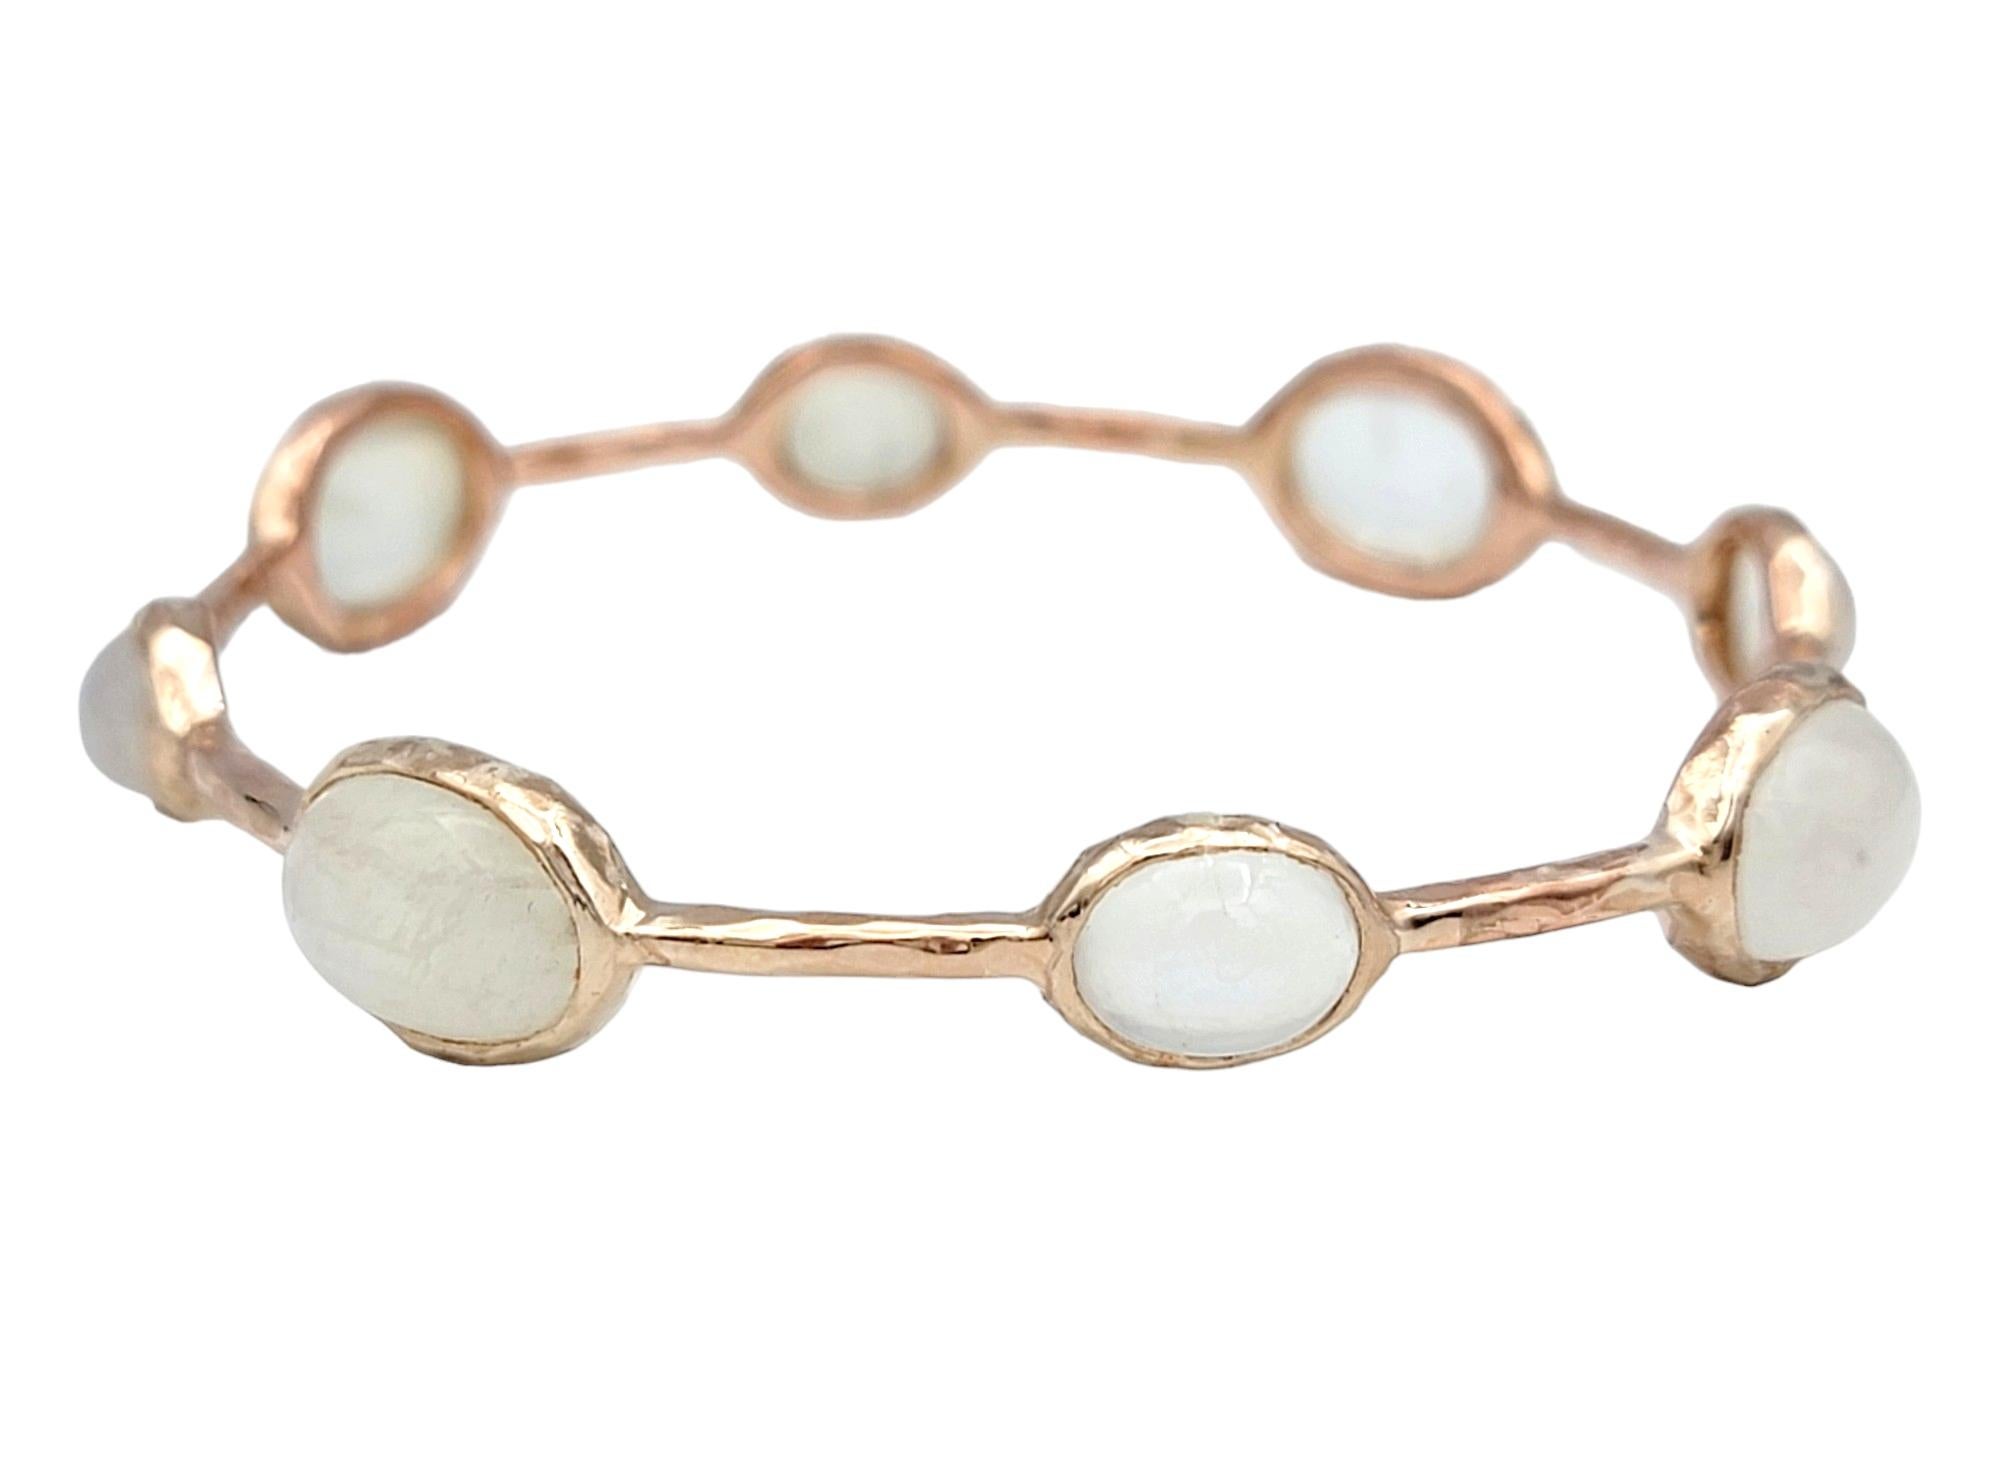 Contemporary Ippolita Oval Cabochon Moonstone Bangle Bracelet Set in Rose Gold Plated Silver For Sale